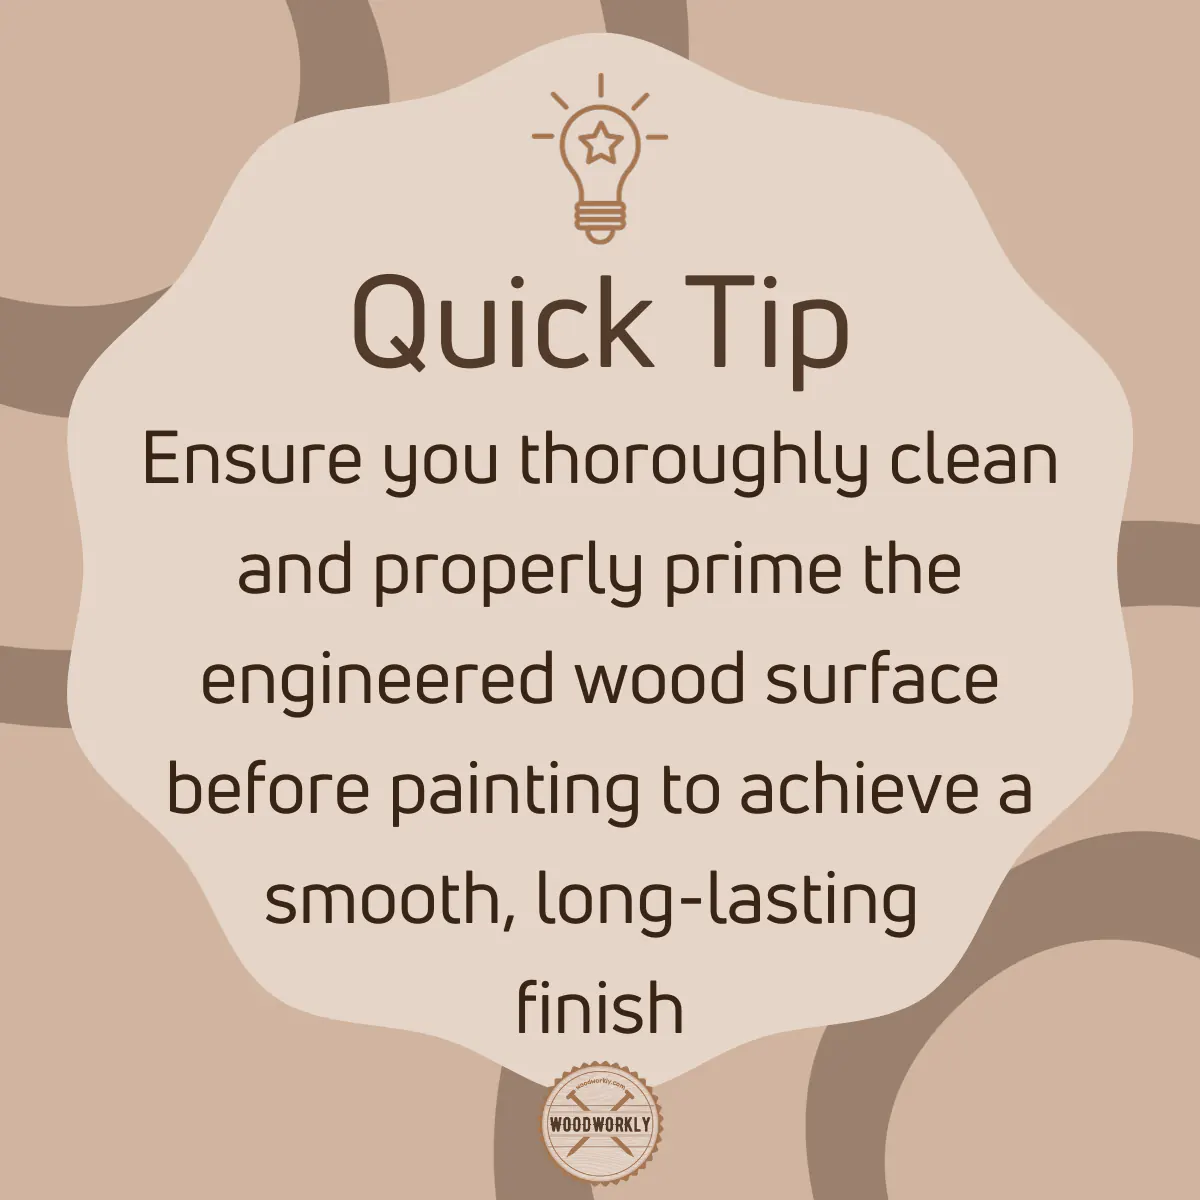 Tip for painting engineered wood